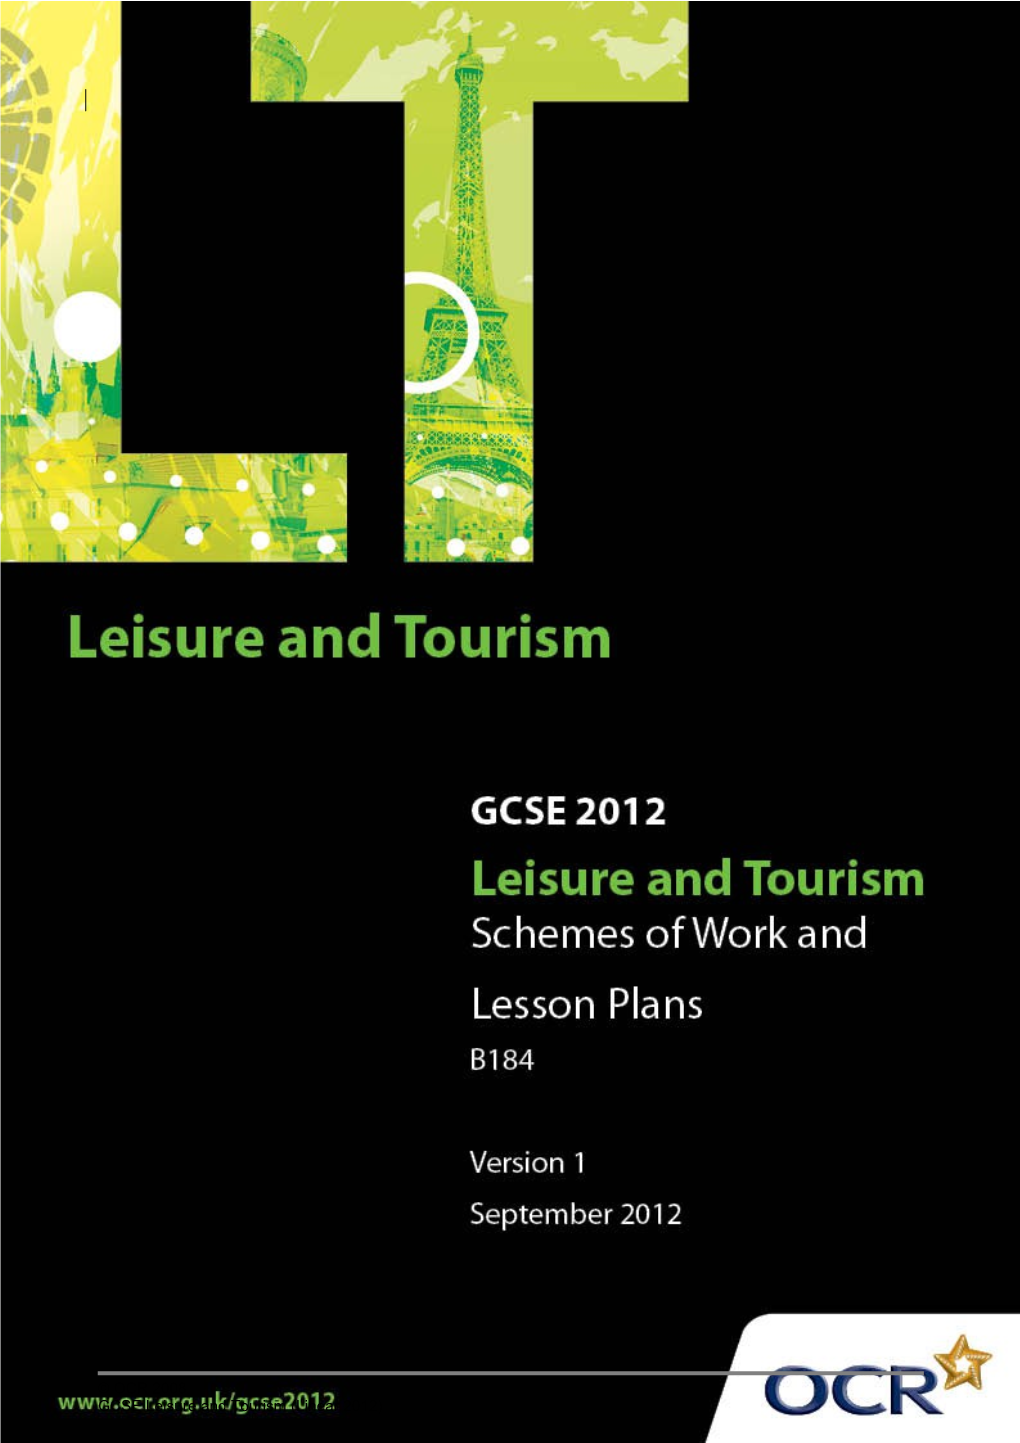 GCSE Leisure and Tourism (Linear 2012) 1 of 18